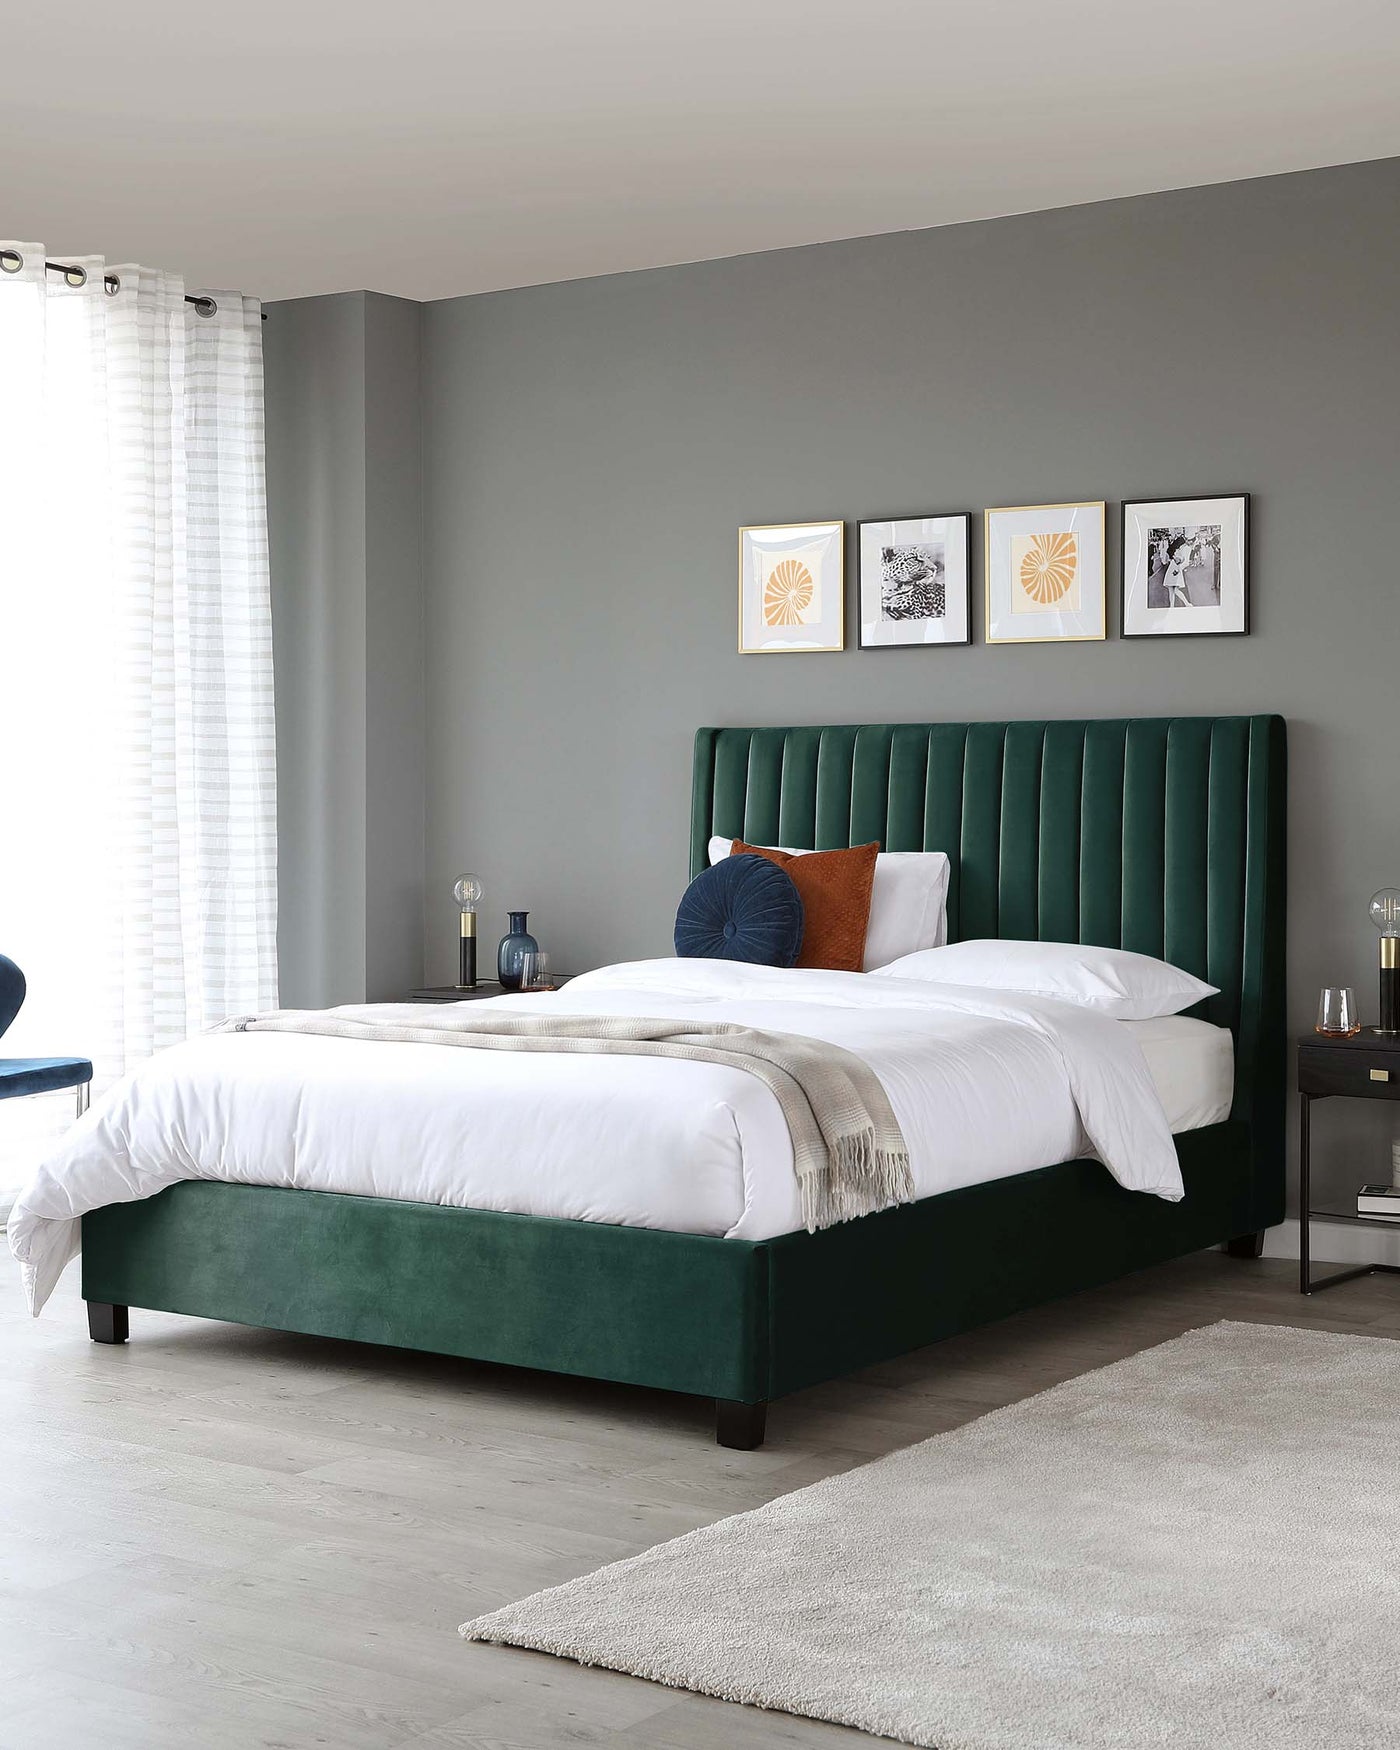 Elegant bedroom featuring a luxurious emerald green upholstered bed with channel-tufted headboard, flanked by two sleek metal and glass side tables, complementing the modern, sophisticated aesthetic of the room.